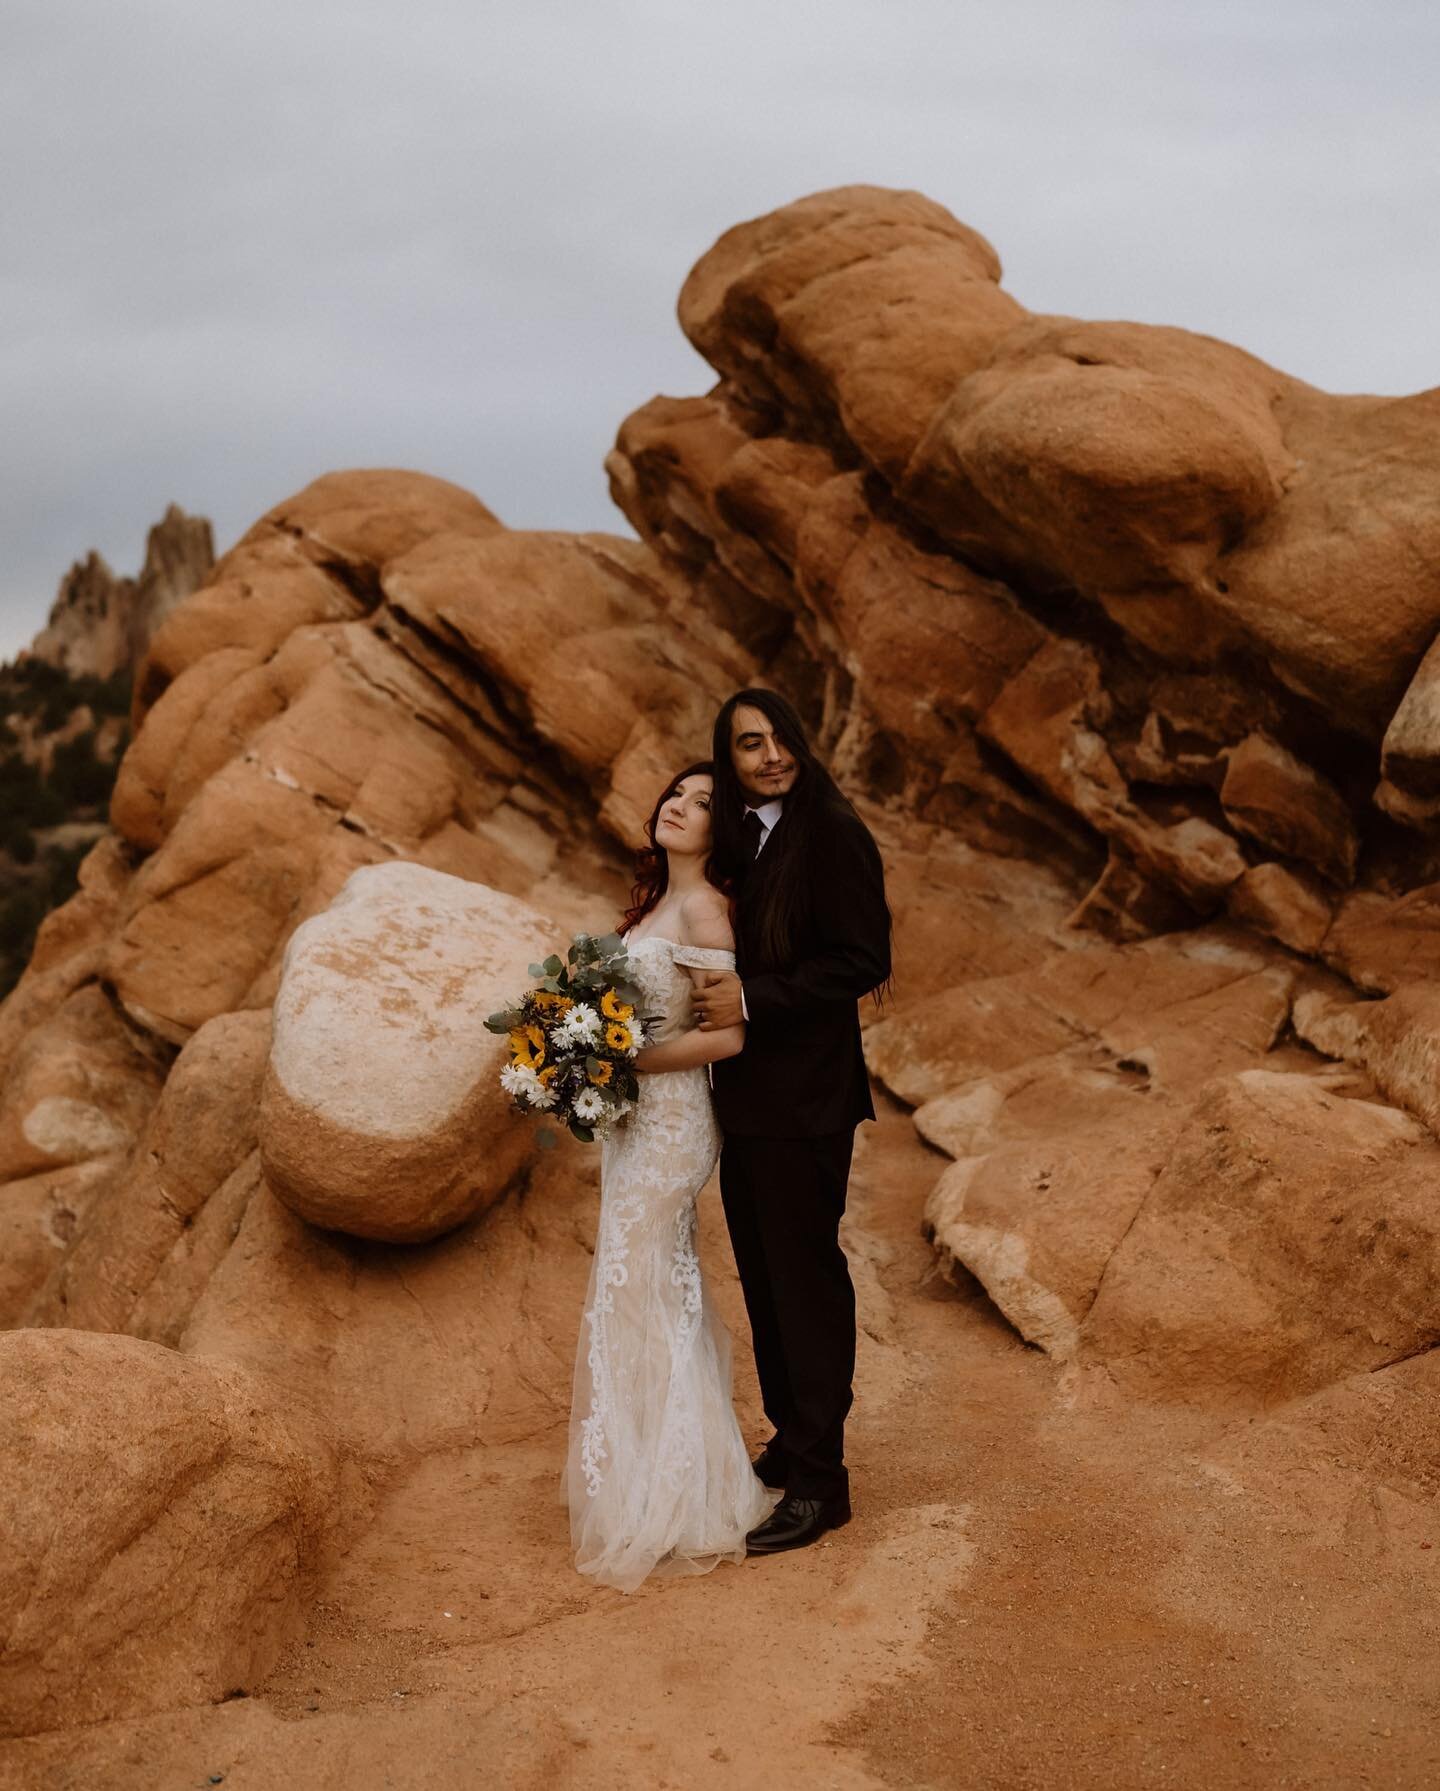 Throwing it back to Fall Season at Garden of the Gods while Denver is currently serving some negative temps. Thank you Chelsi+Gage for trusting me to photograph your special love and energy ❤️